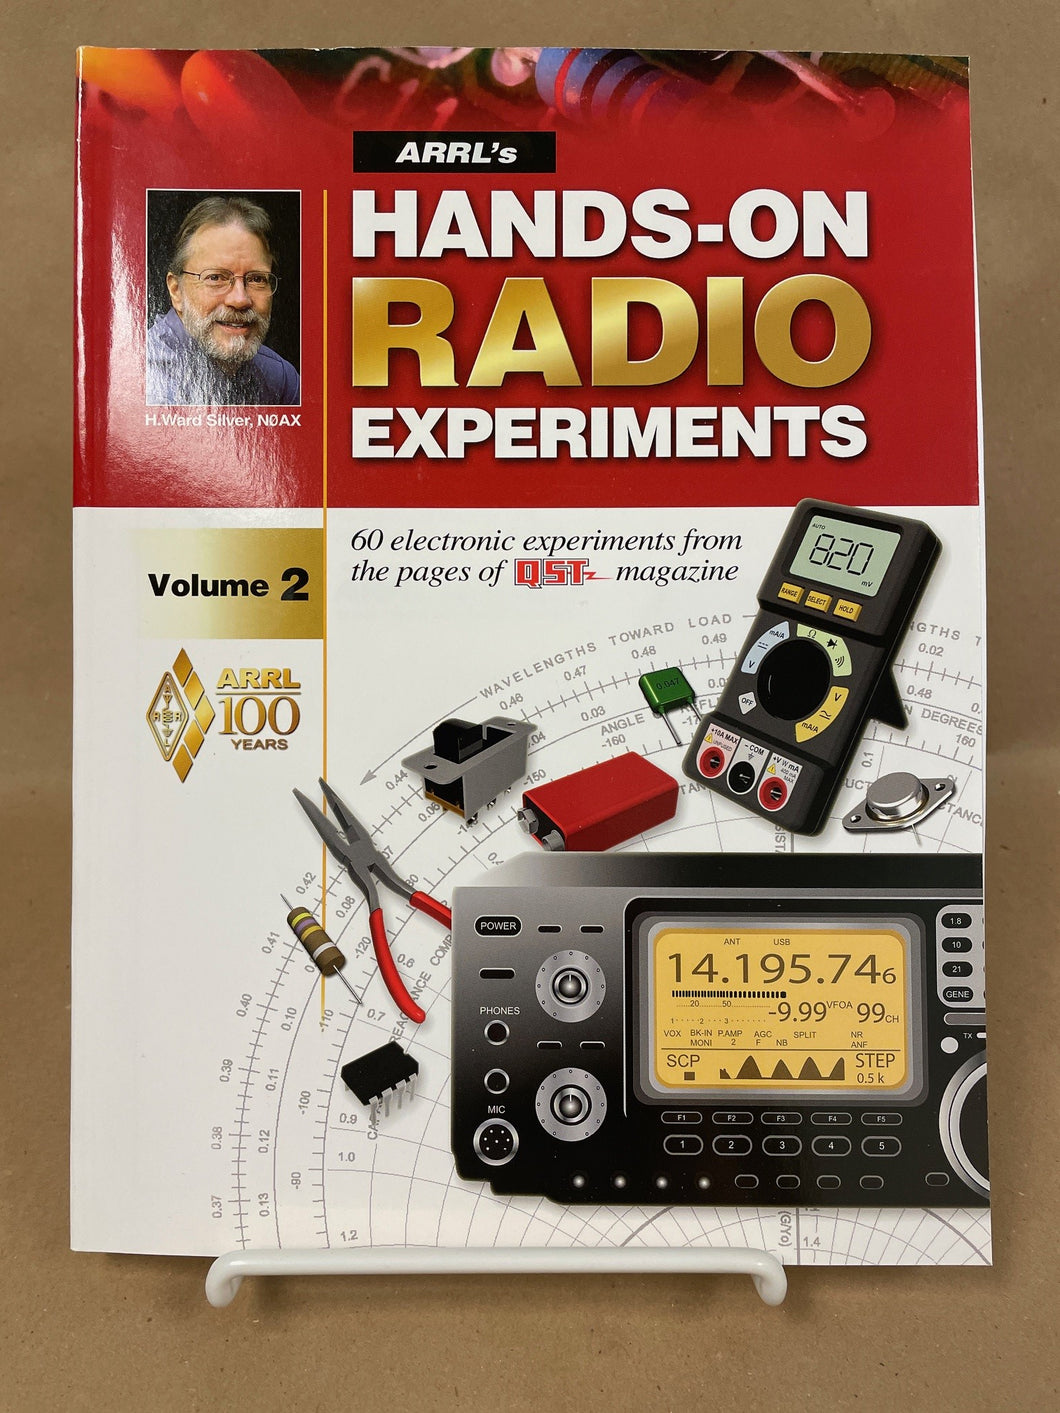 AARL's Hands-On Radio Experiments, Volume 2: 60 Electronic Experiments From the Pages of QST Magazine, H. Ward Silver [2013] CG 2/24